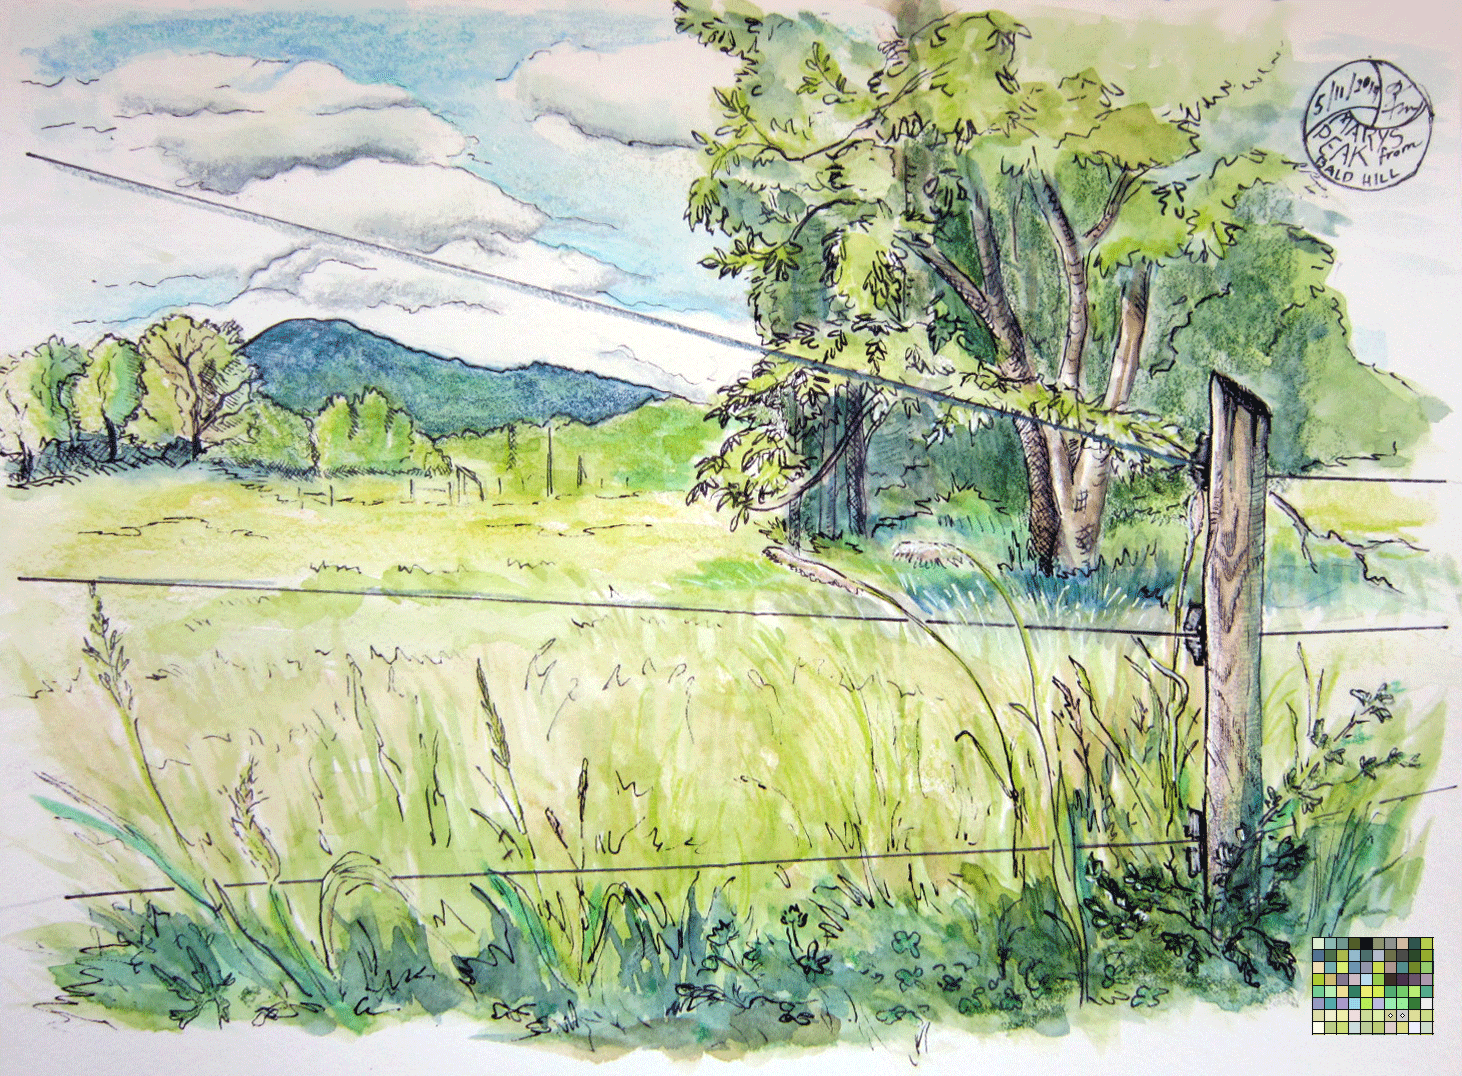 "Mary's Peak from Bald Hill", mixed media sketch by Kerry McFall